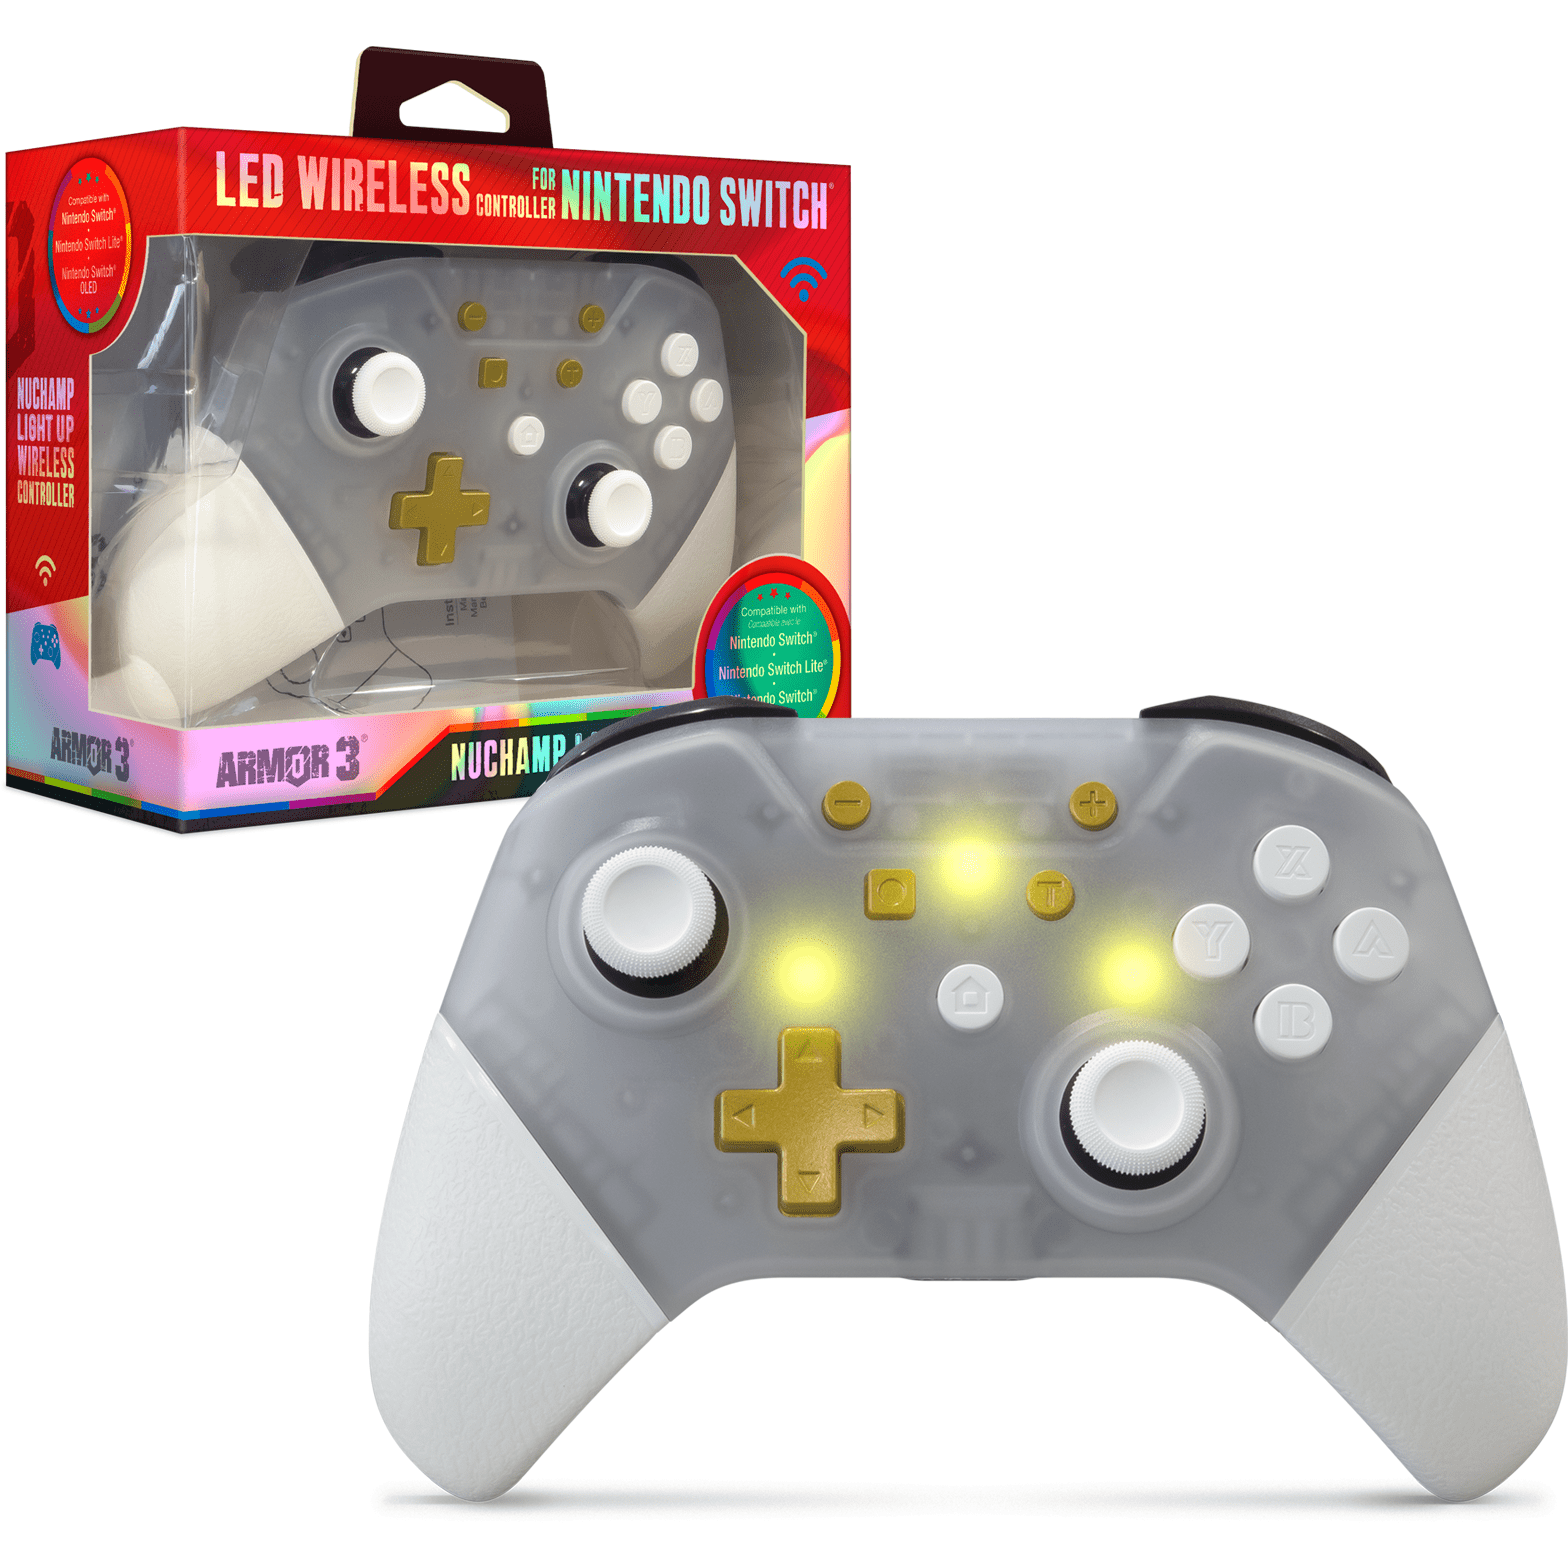 NuChamp Wireless Controller for Nintendo Switch (Clear)